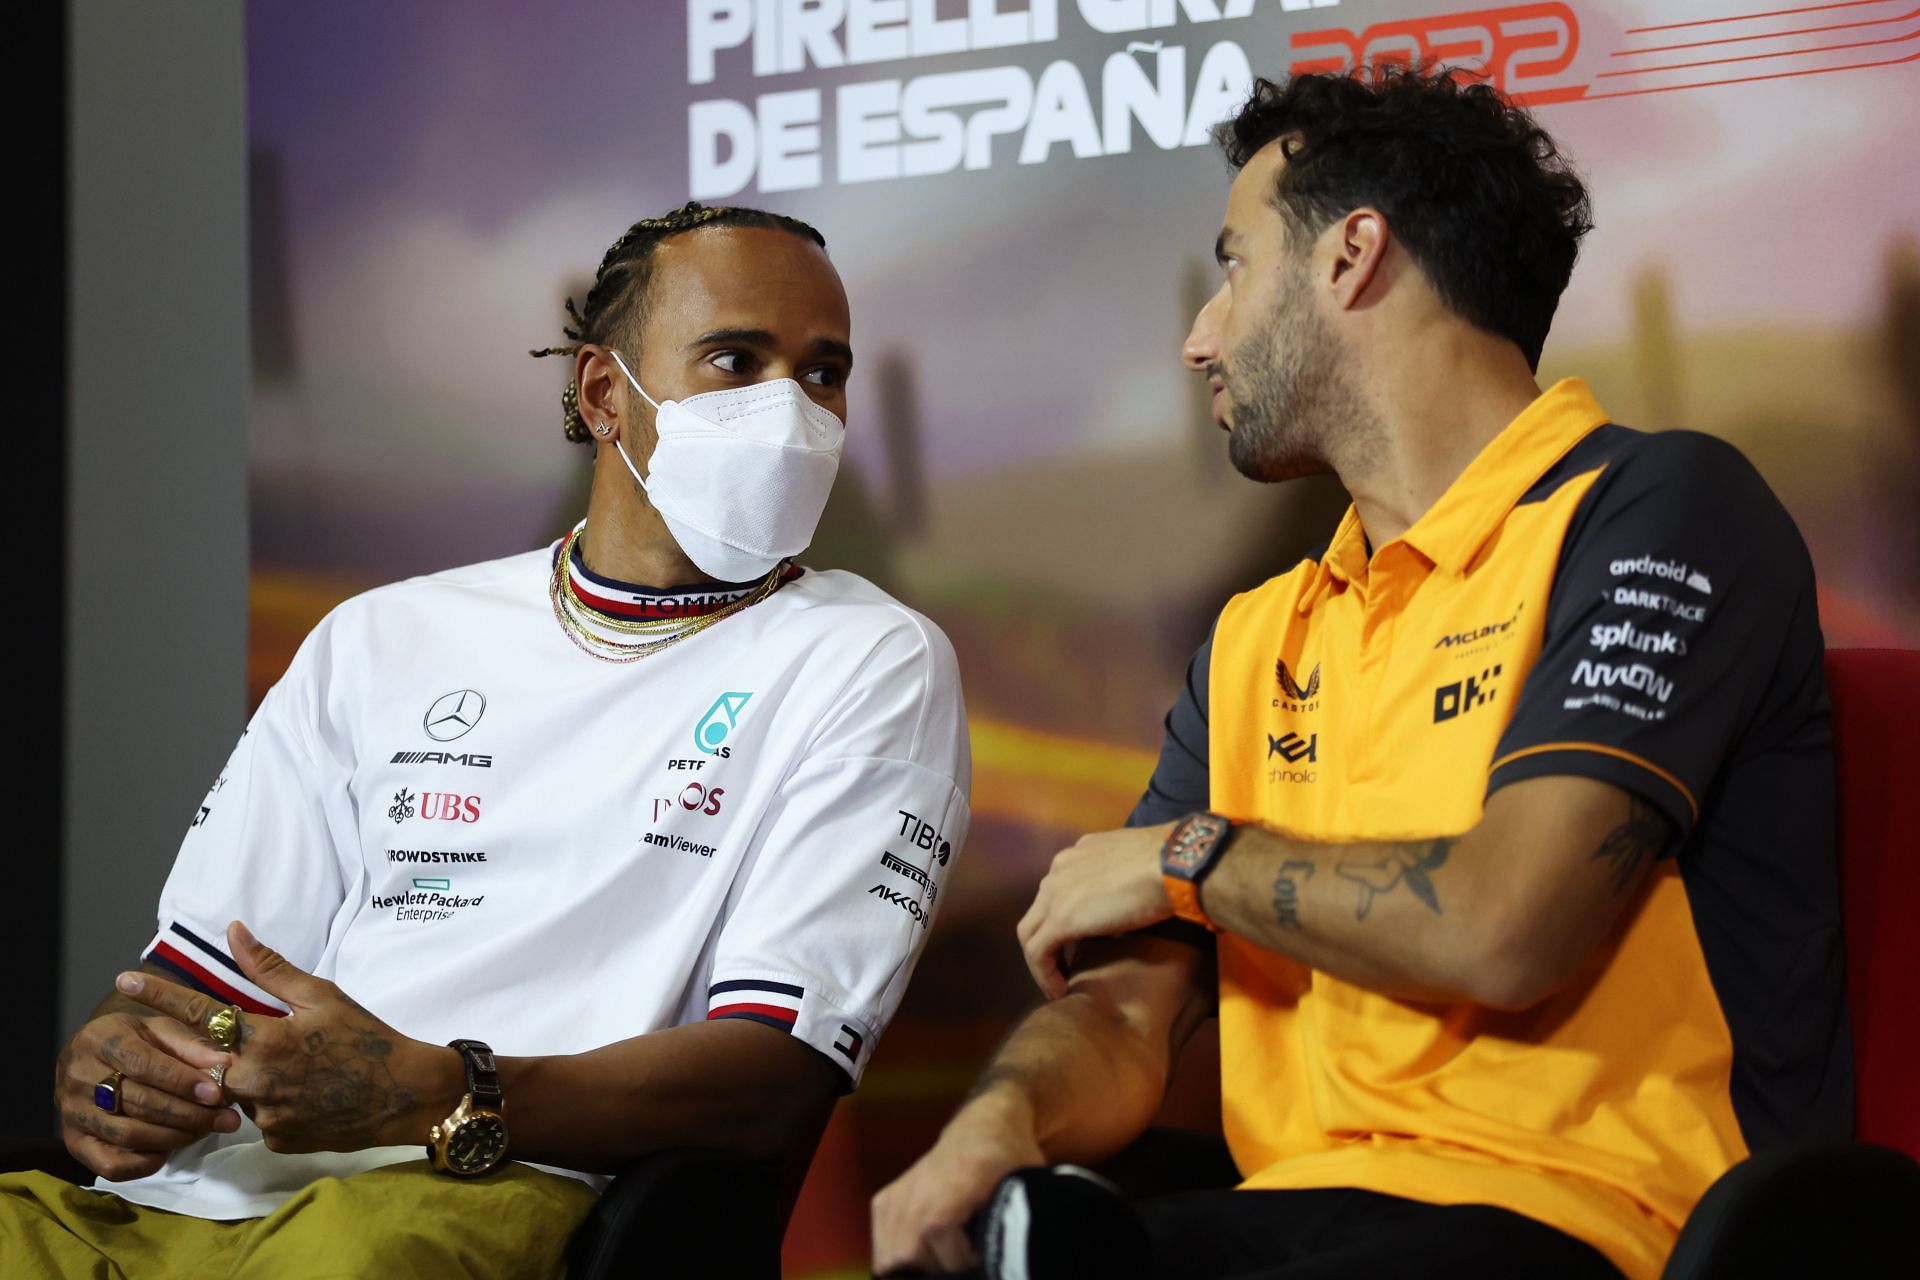 Lewis Hamilton and Ricciardo talking in a Drivers&#039; Press Conference in Spain. (Photo by Bryn Lennon/Getty Images)